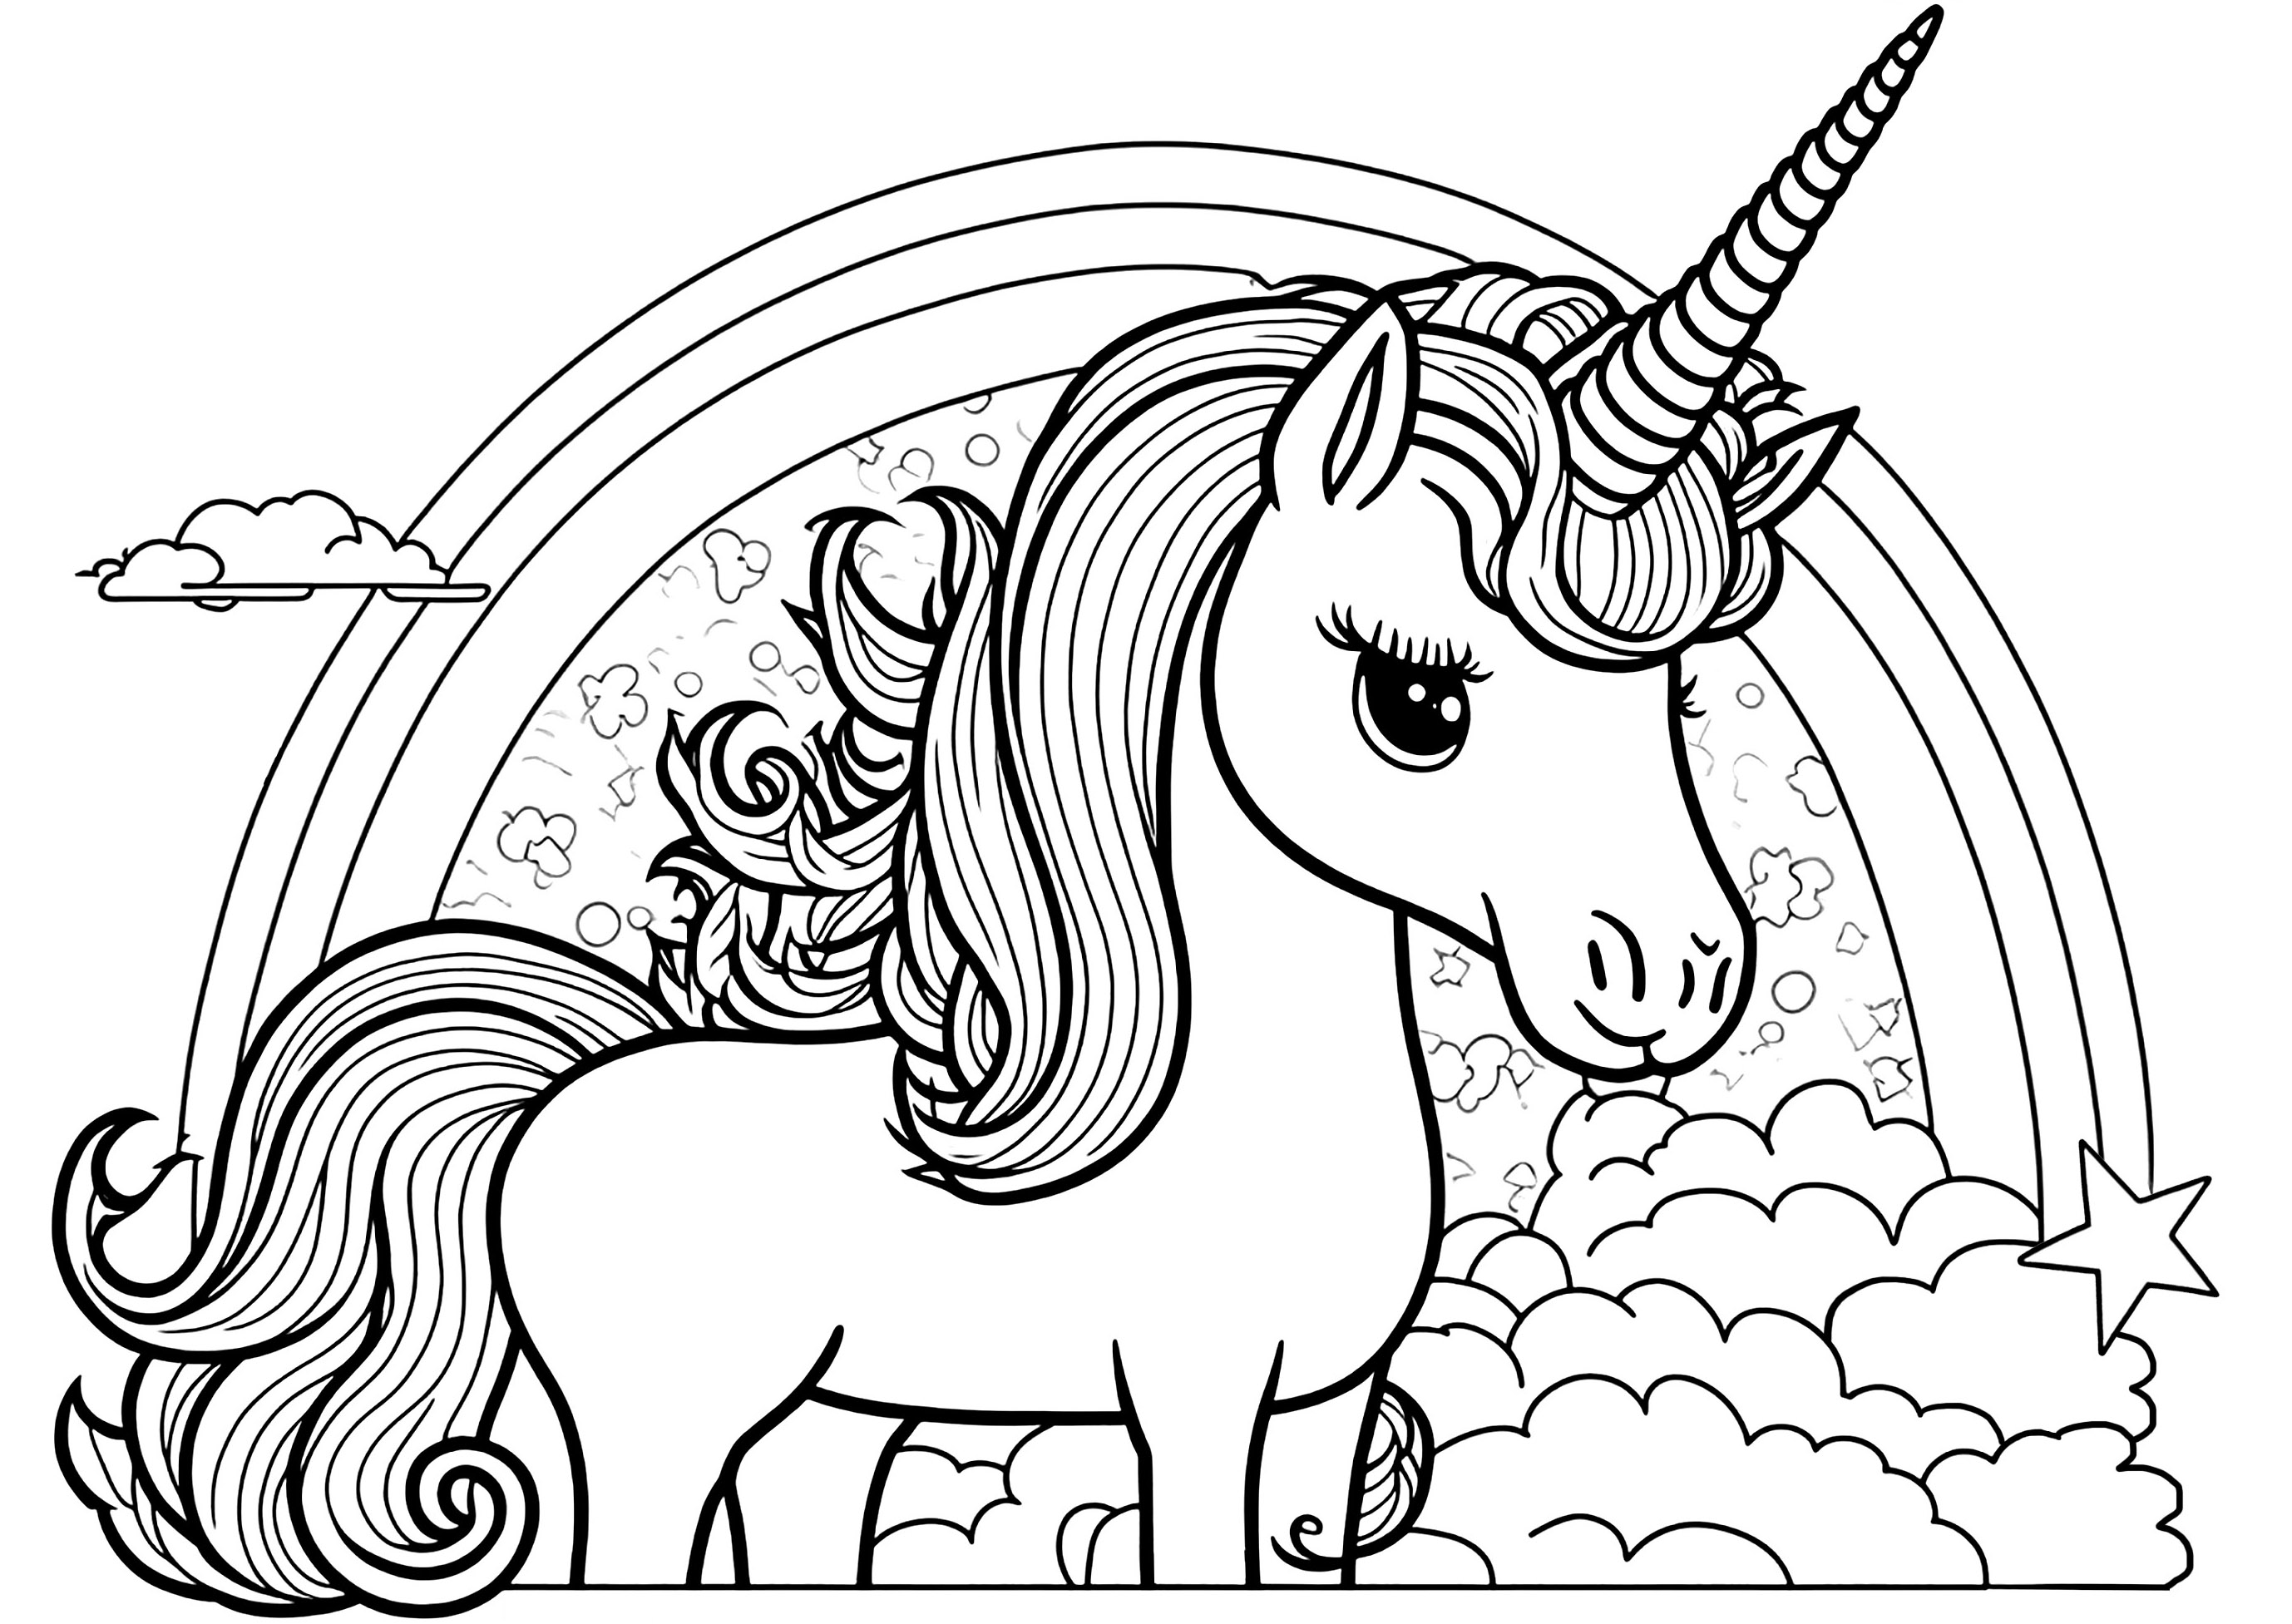 Simple coloring of a unicorn in front of a rainbow. This coloring page is perfect for kids who love unicorns and rainbows! It is just waiting for beautiful colors ...